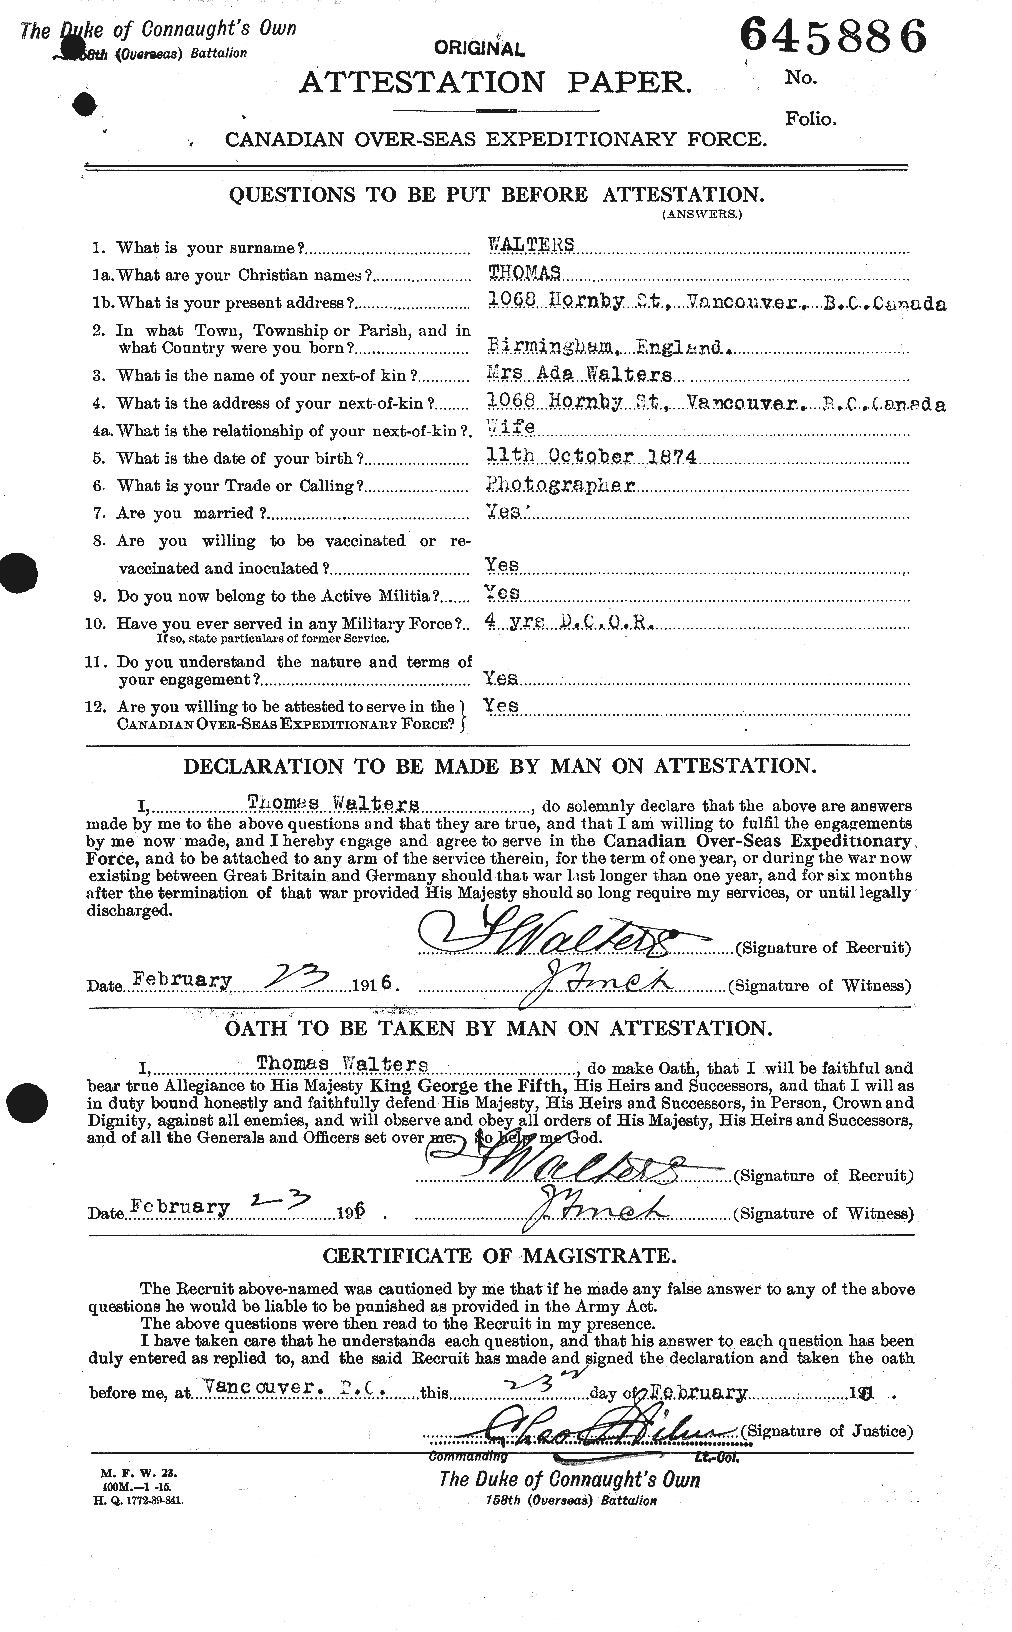 Personnel Records of the First World War - CEF 655452a